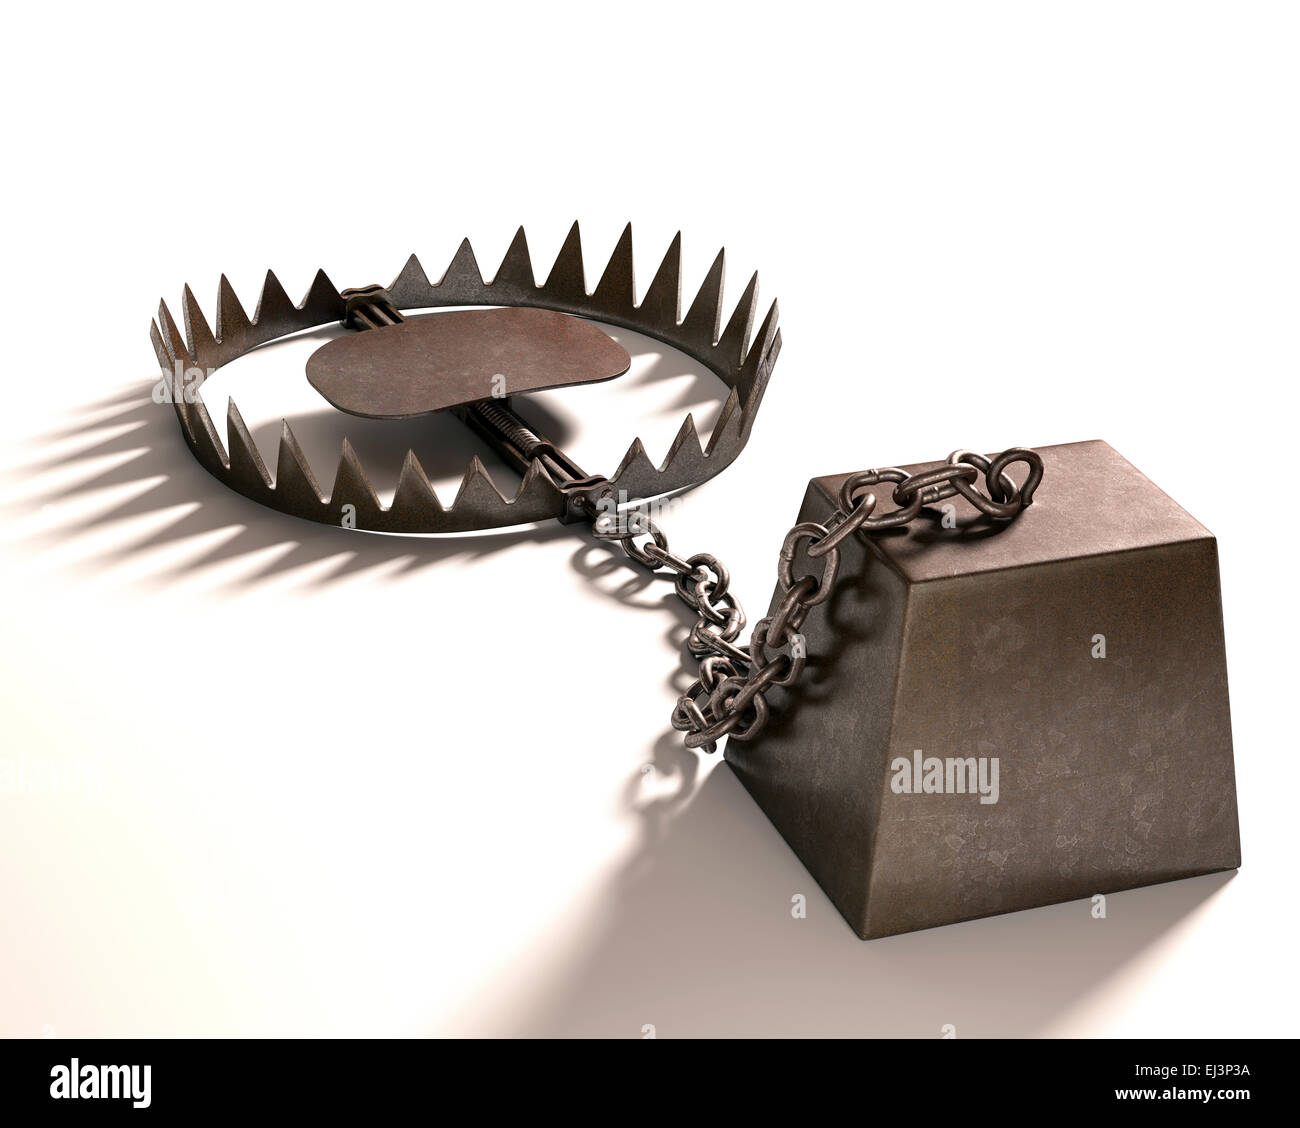 Animal trap and weight, illustration Stock Photo